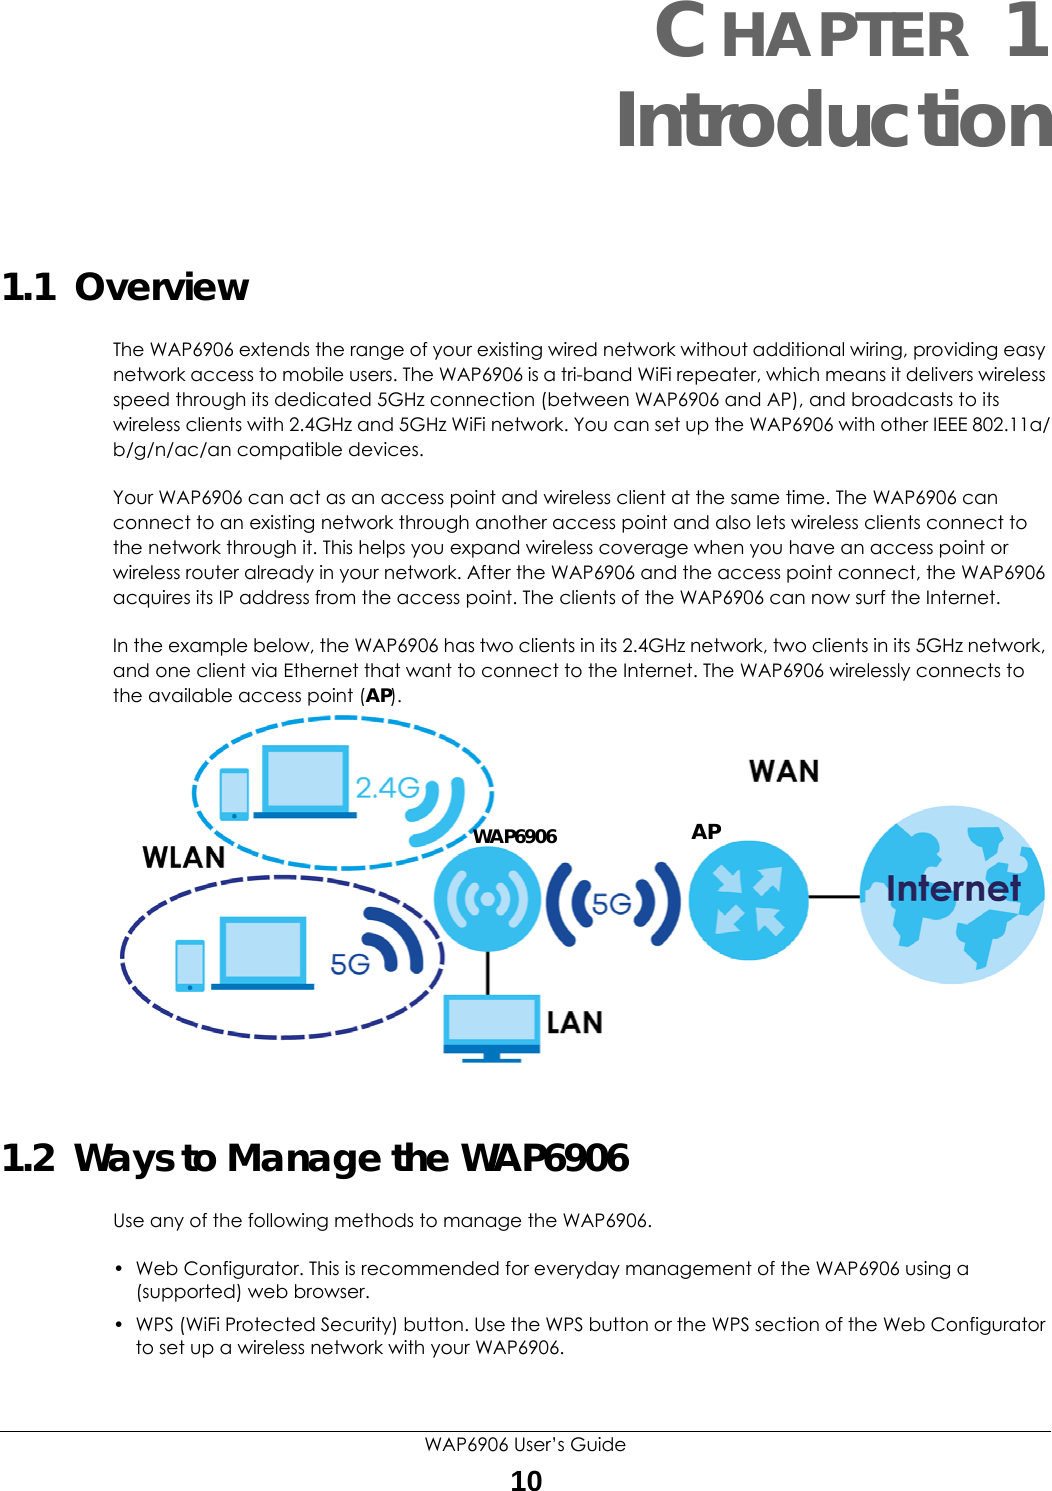 WAP6906 User’s Guide10CHAPTER 1Introduction1.1  OverviewThe WAP6906 extends the range of your existing wired network without additional wiring, providing easy network access to mobile users. The WAP6906 is a tri-band WiFi repeater, which means it delivers wireless speed through its dedicated 5GHz connection (between WAP6906 and AP), and broadcasts to its wireless clients with 2.4GHz and 5GHz WiFi network. You can set up the WAP6906 with other IEEE 802.11a/b/g/n/ac/an compatible devices.Your WAP6906 can act as an access point and wireless client at the same time. The WAP6906 can connect to an existing network through another access point and also lets wireless clients connect to the network through it. This helps you expand wireless coverage when you have an access point or wireless router already in your network. After the WAP6906 and the access point connect, the WAP6906 acquires its IP address from the access point. The clients of the WAP6906 can now surf the Internet.In the example below, the WAP6906 has two clients in its 2.4GHz network, two clients in its 5GHz network, and one client via Ethernet that want to connect to the Internet. The WAP6906 wirelessly connects to the available access point (AP). 1.2  Ways to Manage the WAP6906Use any of the following methods to manage the WAP6906.• Web Configurator. This is recommended for everyday management of the WAP6906 using a (supported) web browser.• WPS (WiFi Protected Security) button. Use the WPS button or the WPS section of the Web Configurator to set up a wireless network with your WAP6906. WAP6906 AP